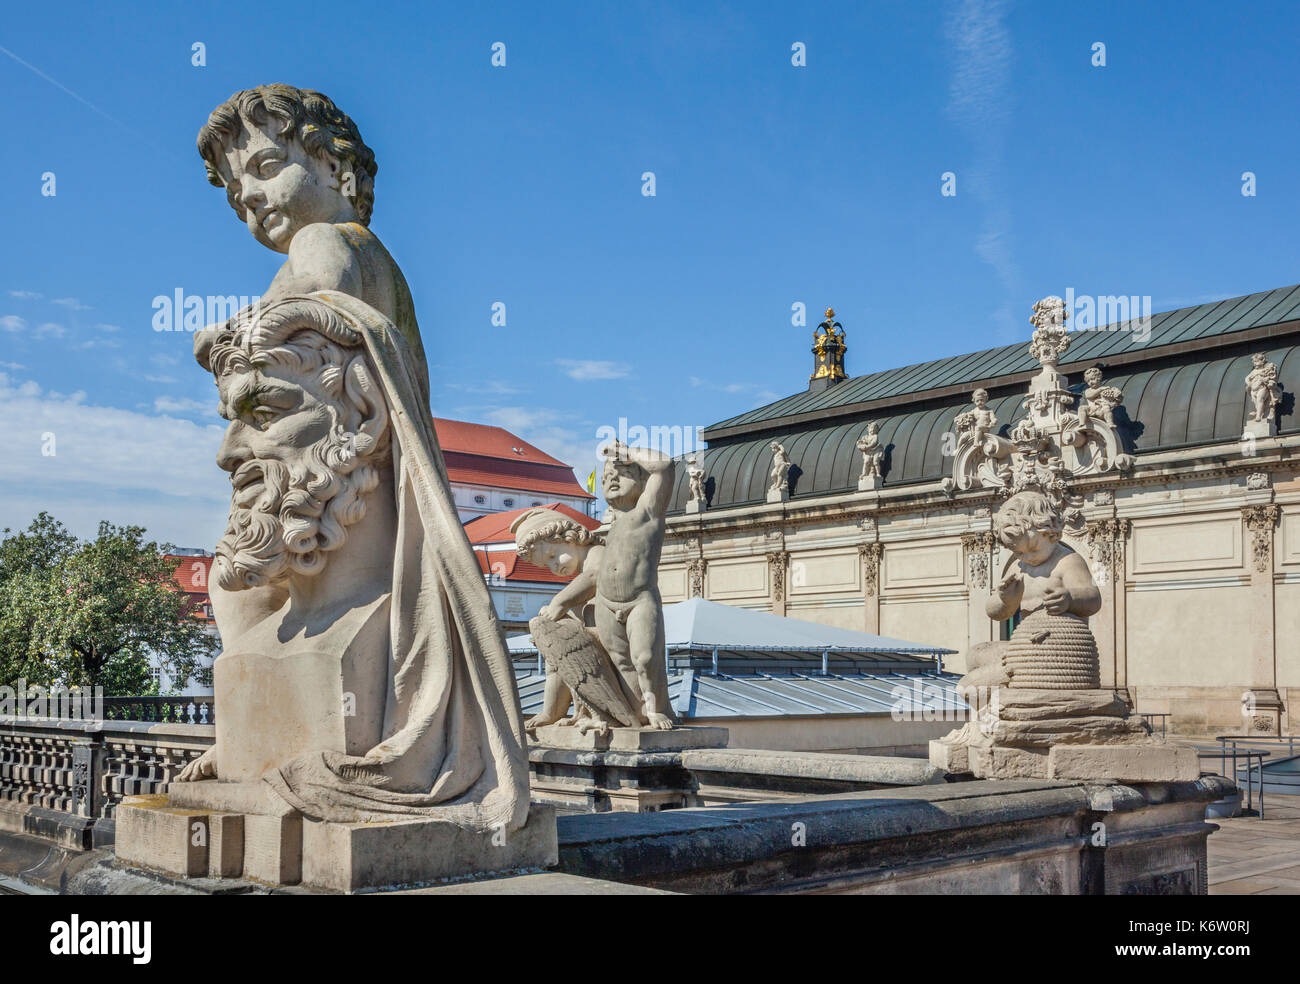 Germany, Saxony, Dresdener Zwinger, putti statues on the gallery of the Porcelain Pavilion Stock Photo